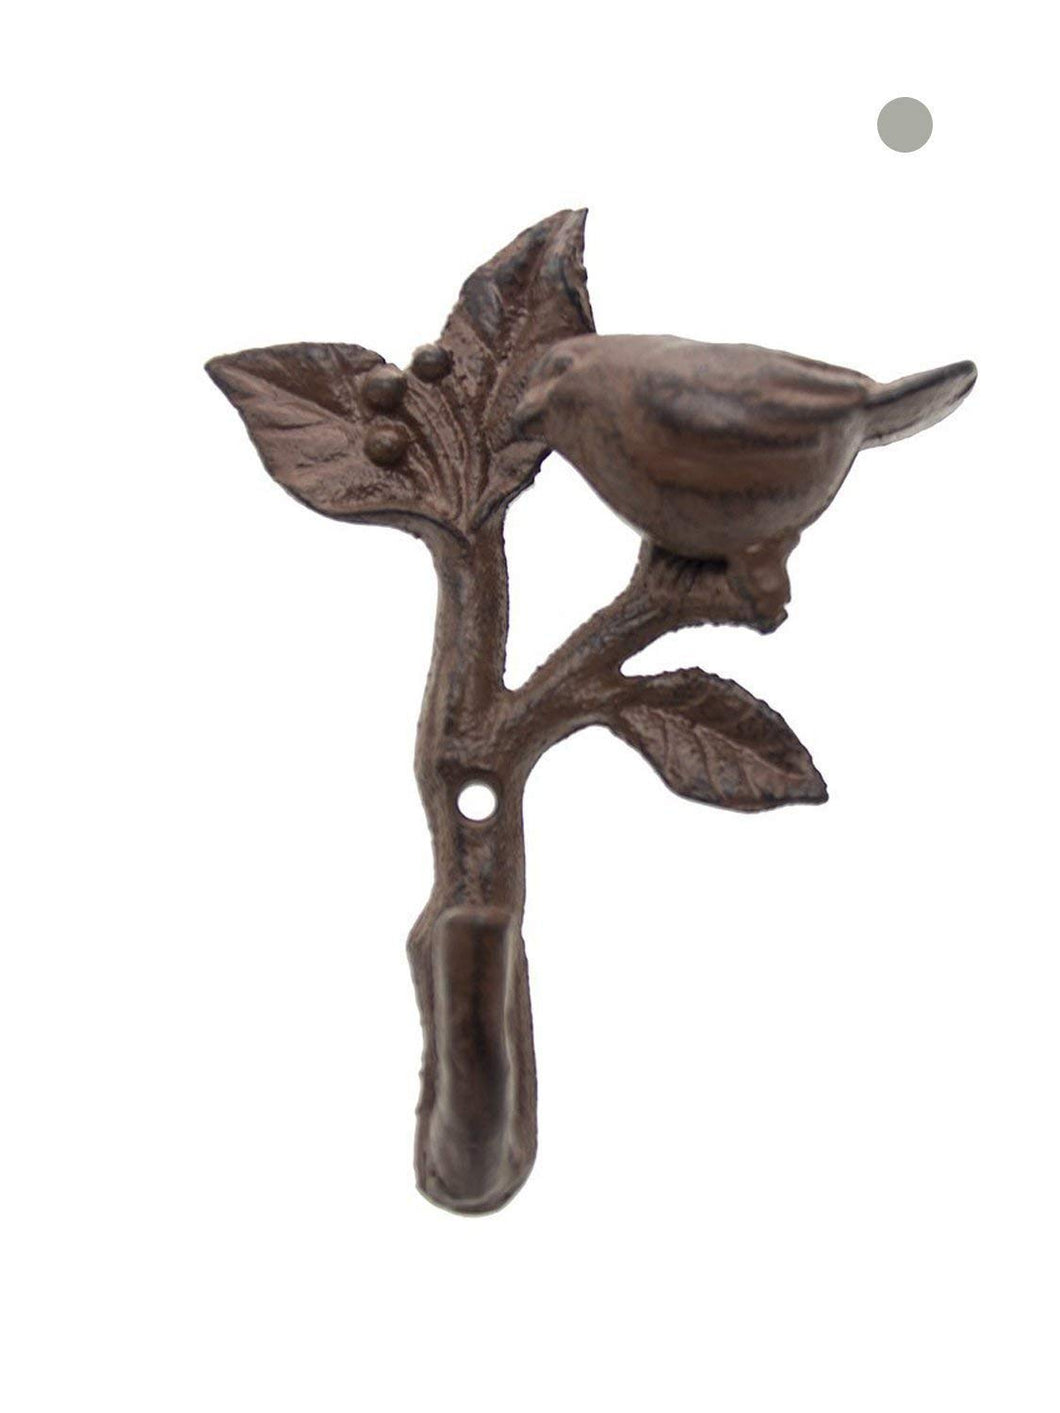 Bird On A Branch Single Wall Hook / Hanger - Metal, Heavy Duty, Rustic, Vintage, Recycled, Decorative Gift Idea - 4.7x1.8x6.3